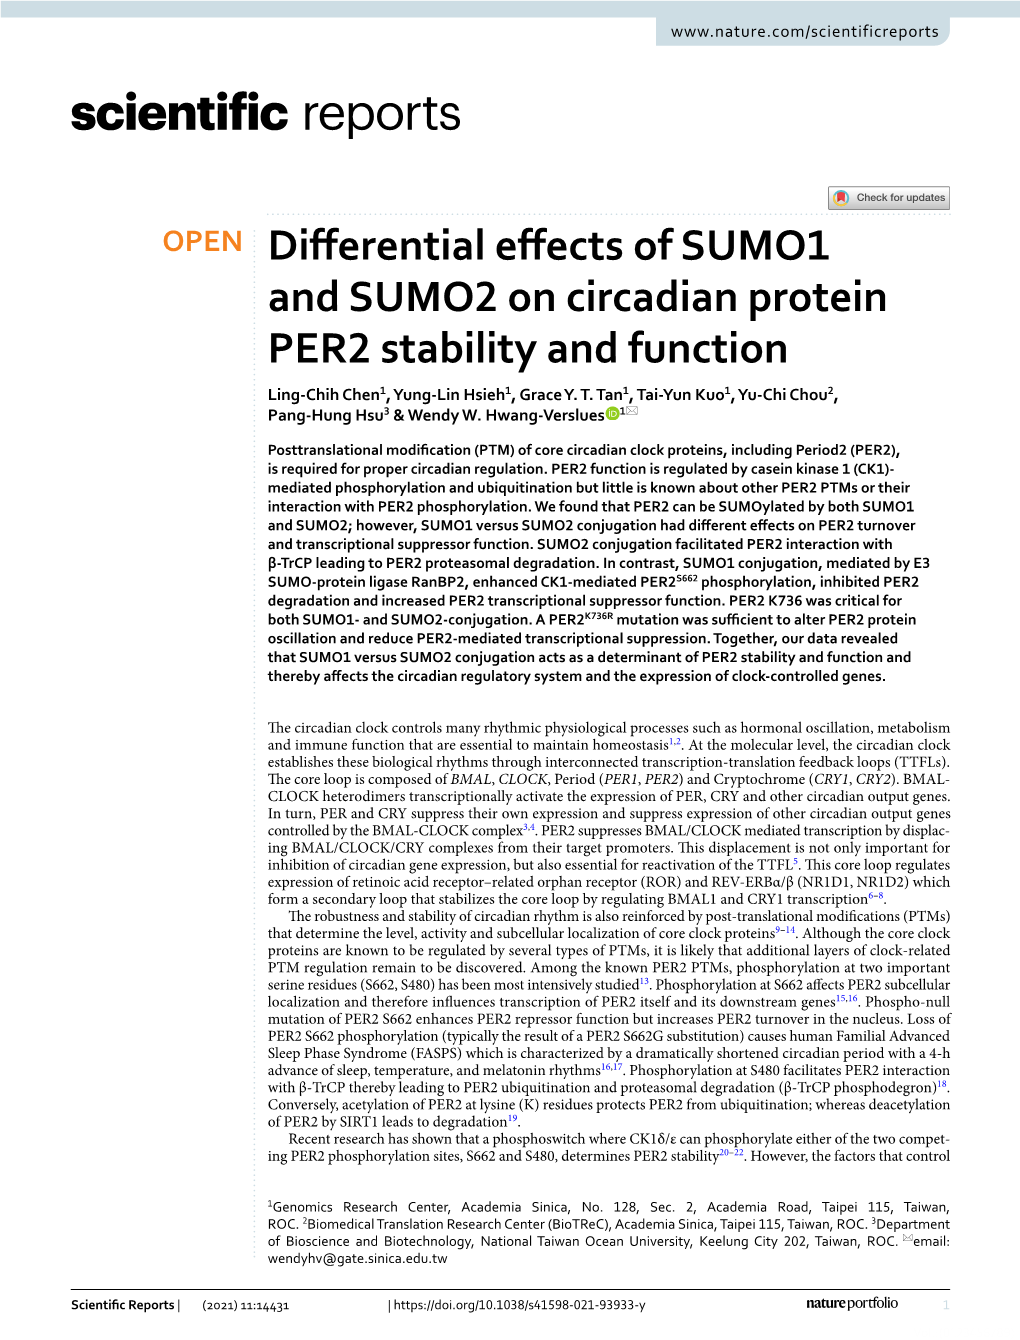 Differential Effects of SUMO1 and SUMO2 on Circadian Protein PER2